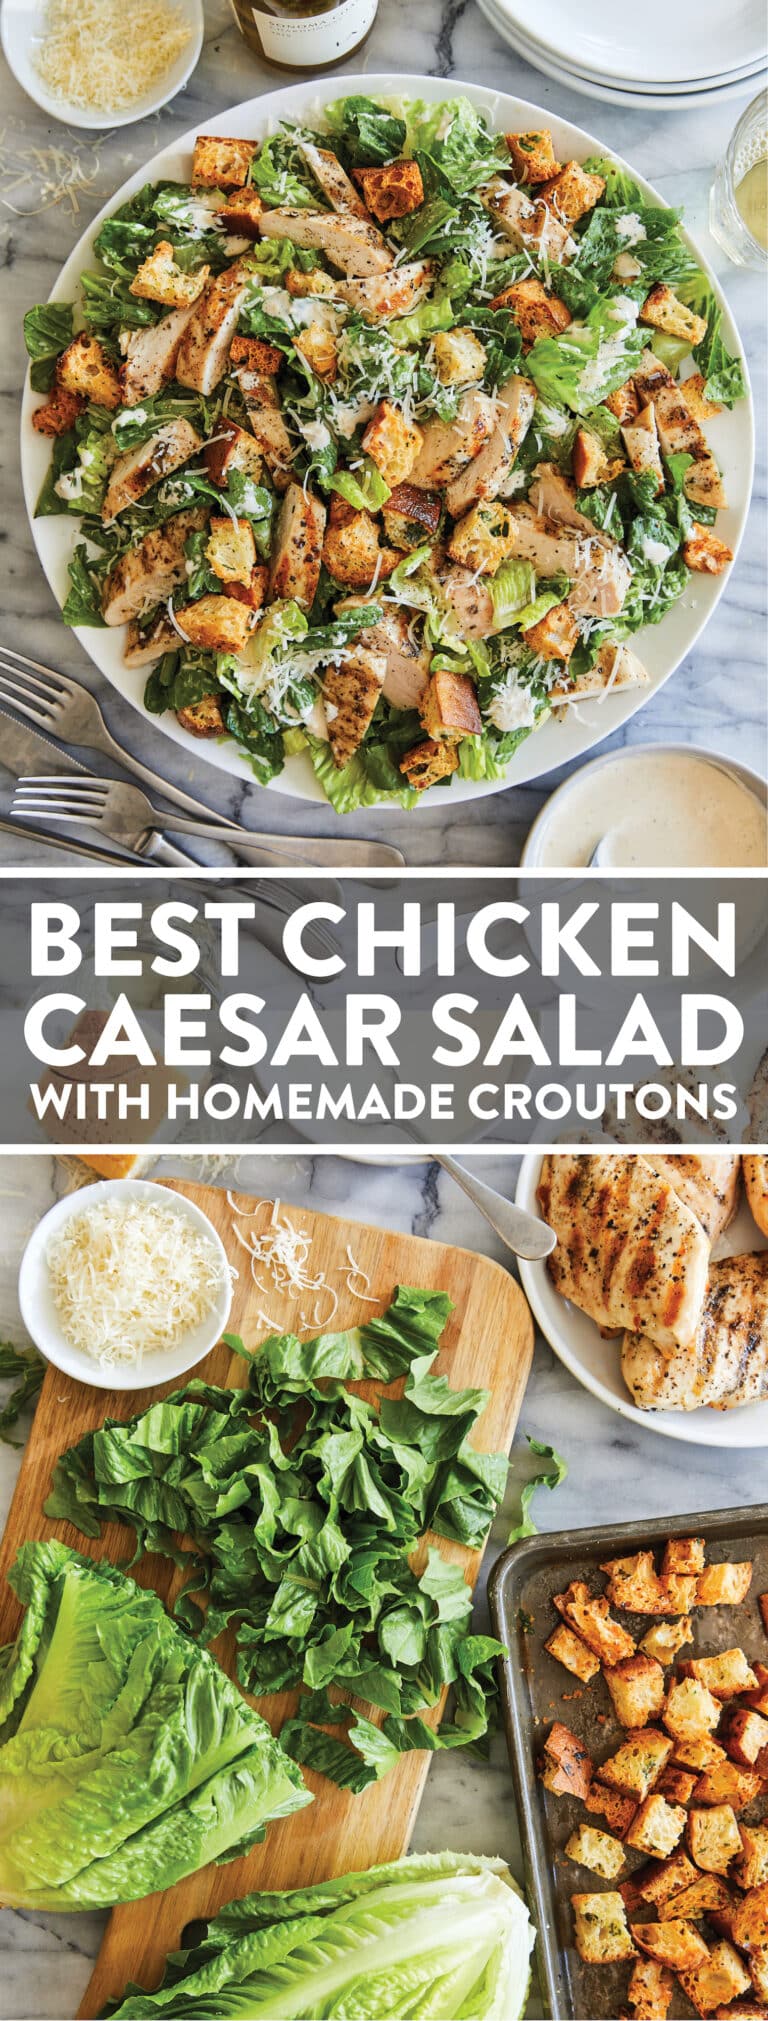 Best Chicken Caesar Salad with Homemade Croutons - Damn Delicious